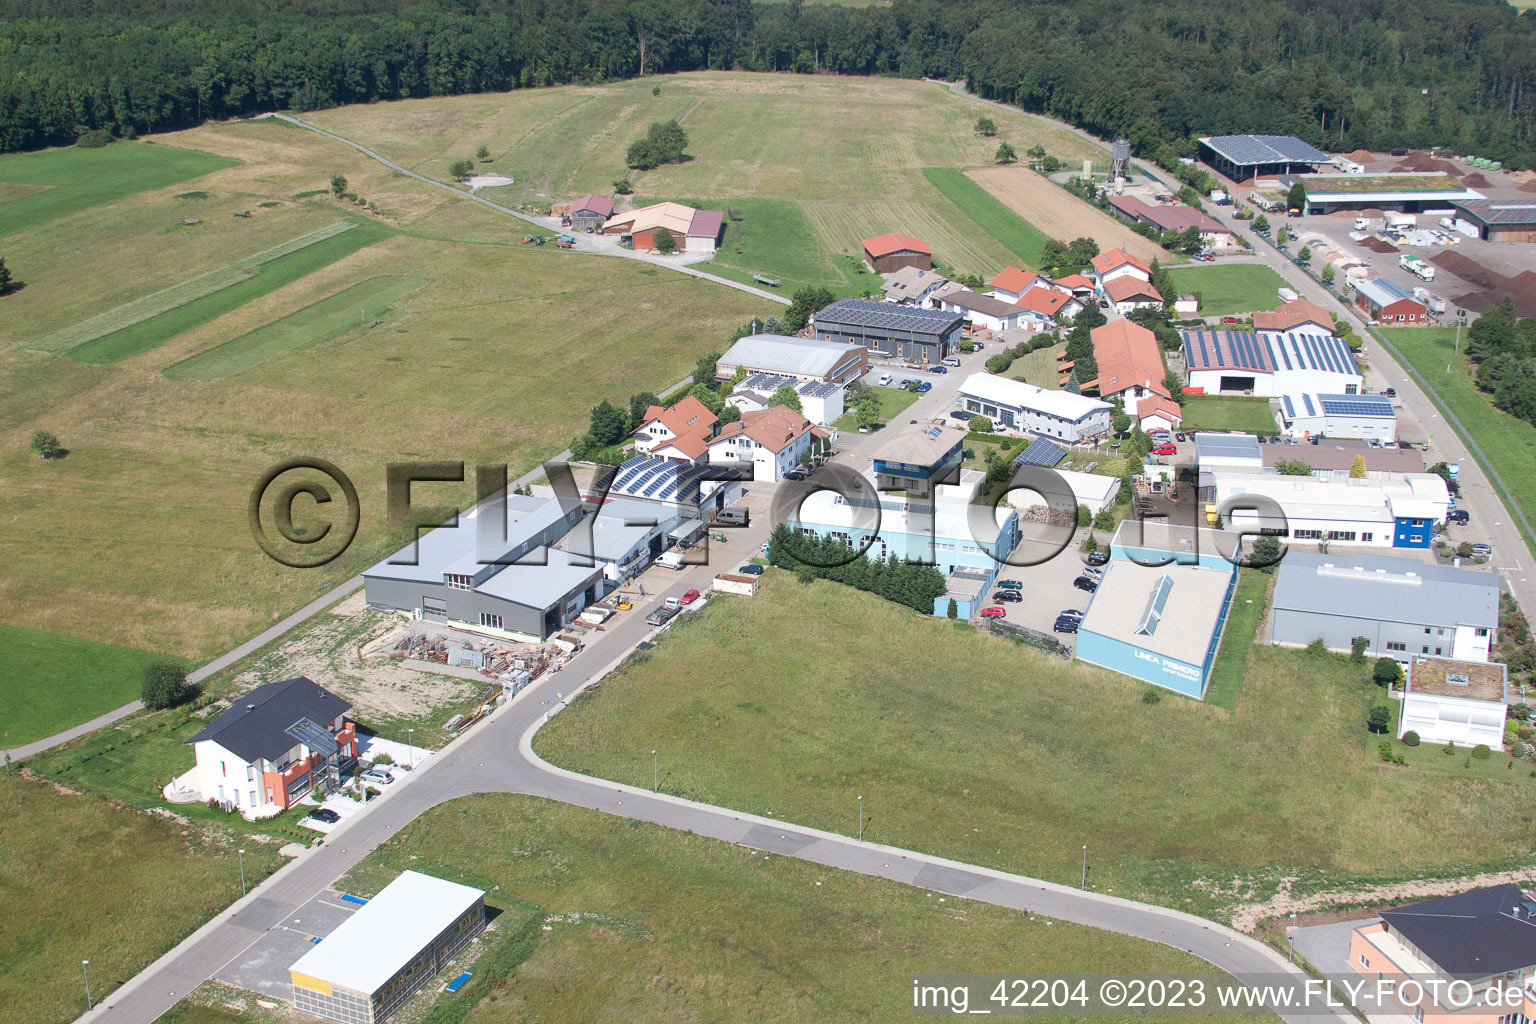 Commercial area in Schwarzenbusch in Pfaffenrot in the state Baden-Wuerttemberg, Germany seen from above